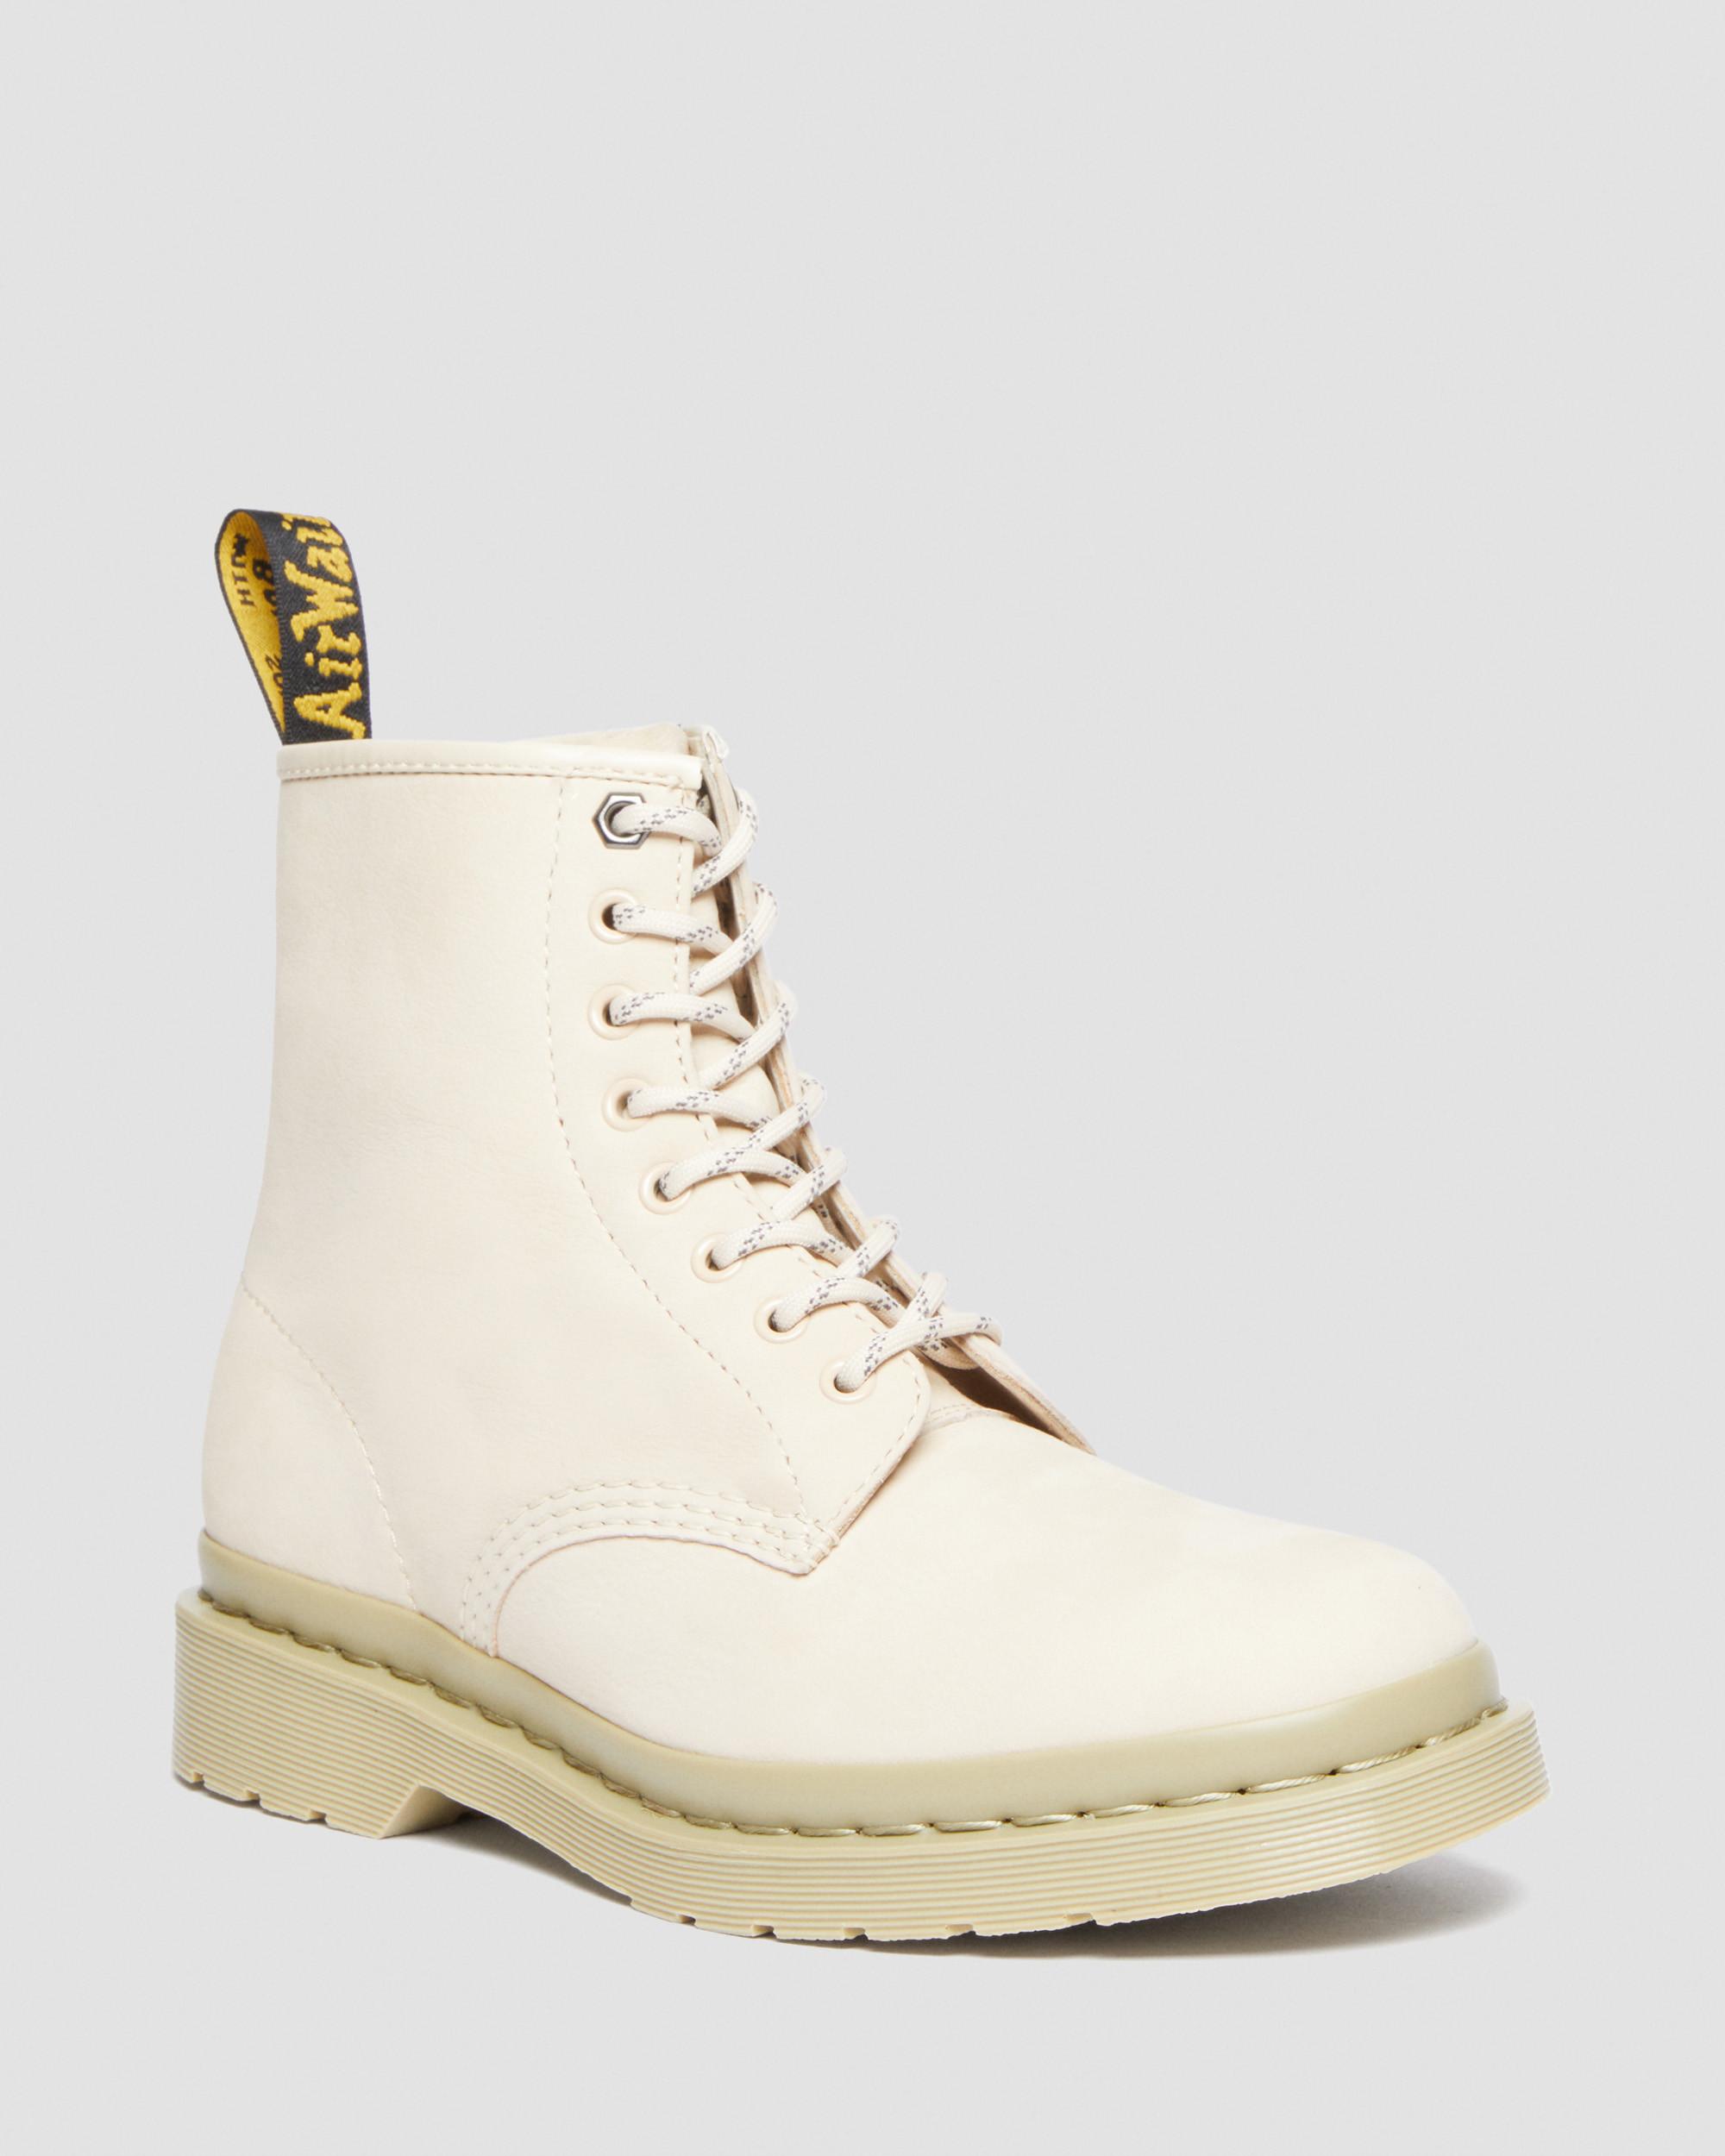 Dr. Martens, 1460 Mono Milled Nubuck Leather Lace Up Boots in Cream, Size 5